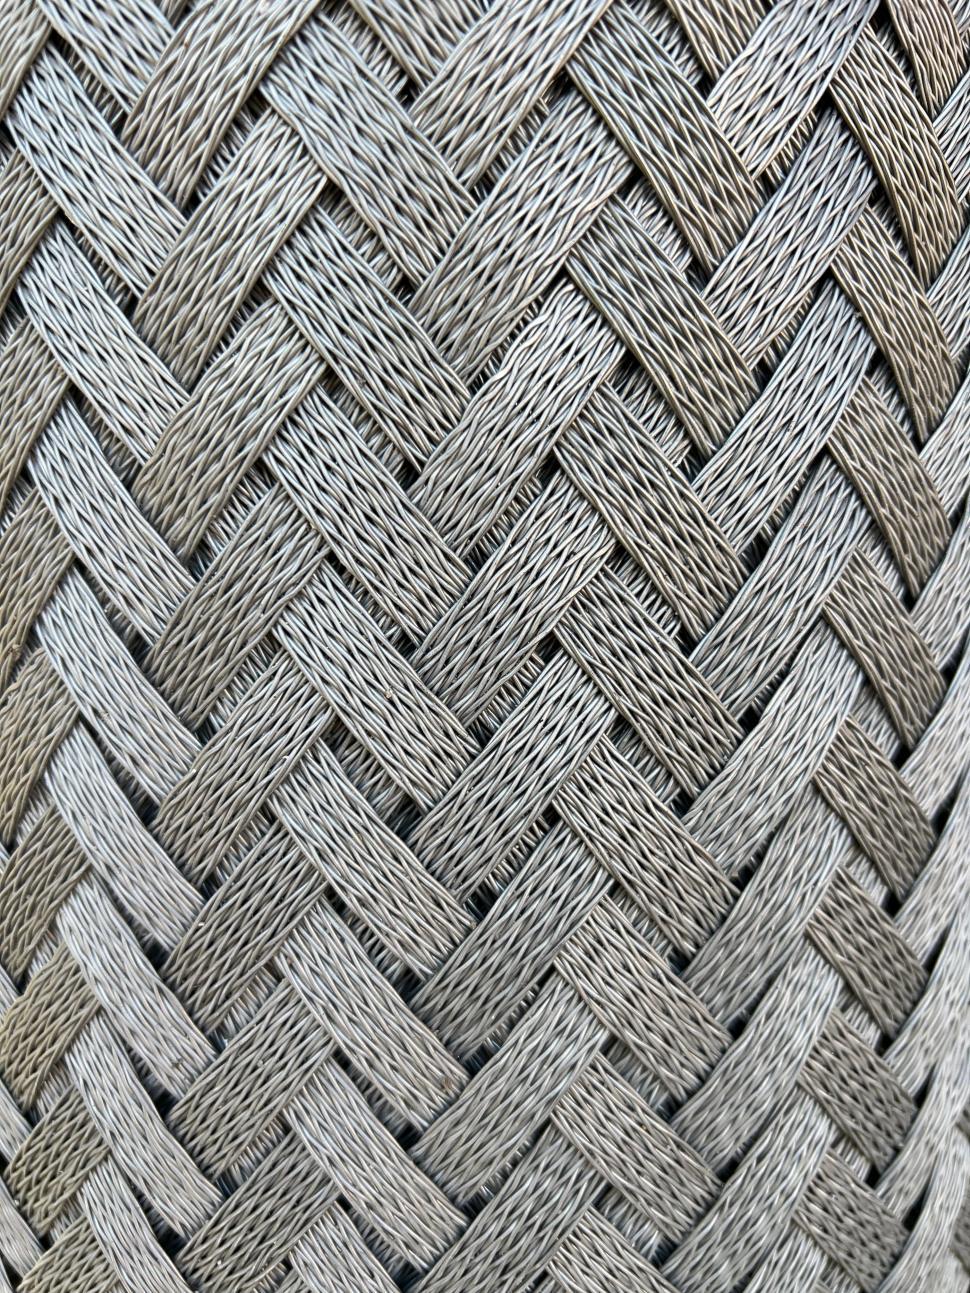 Free Image of Close-up of a woven metal texture 